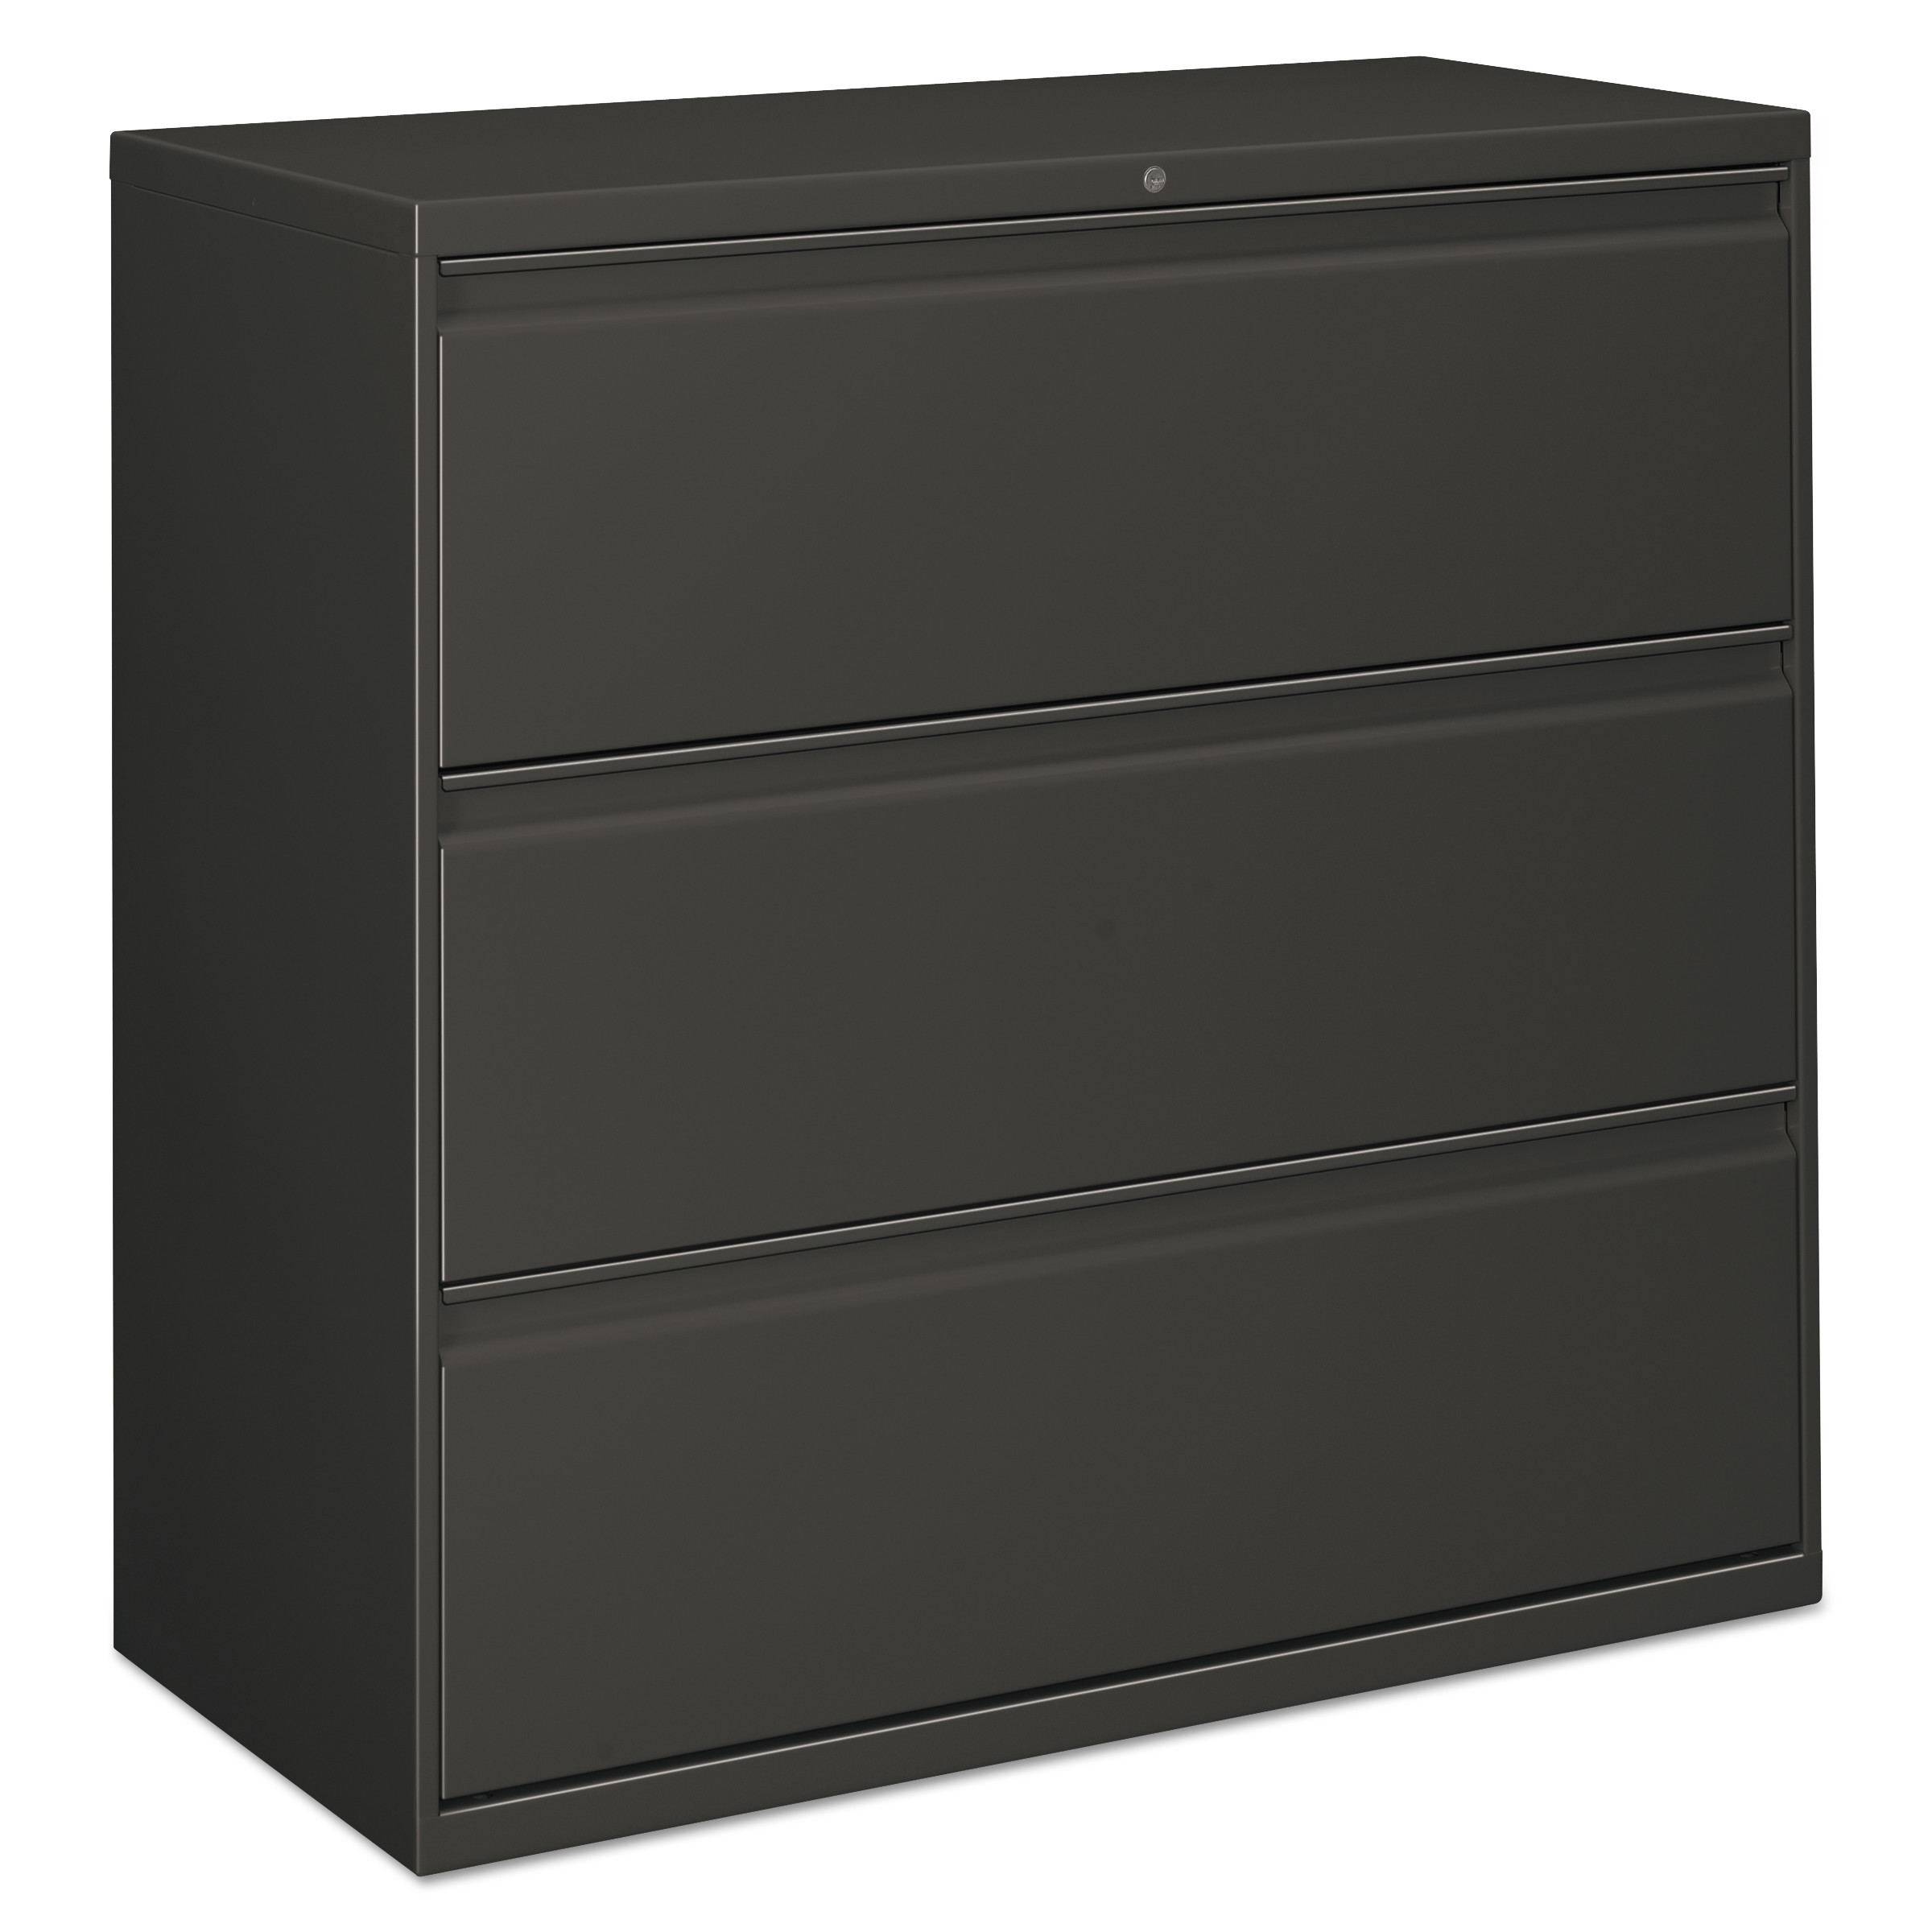 Alera Lateral File, 3 Drawer, 42w x 19.25d x 40.88h, Charcoal - image 2 of 2